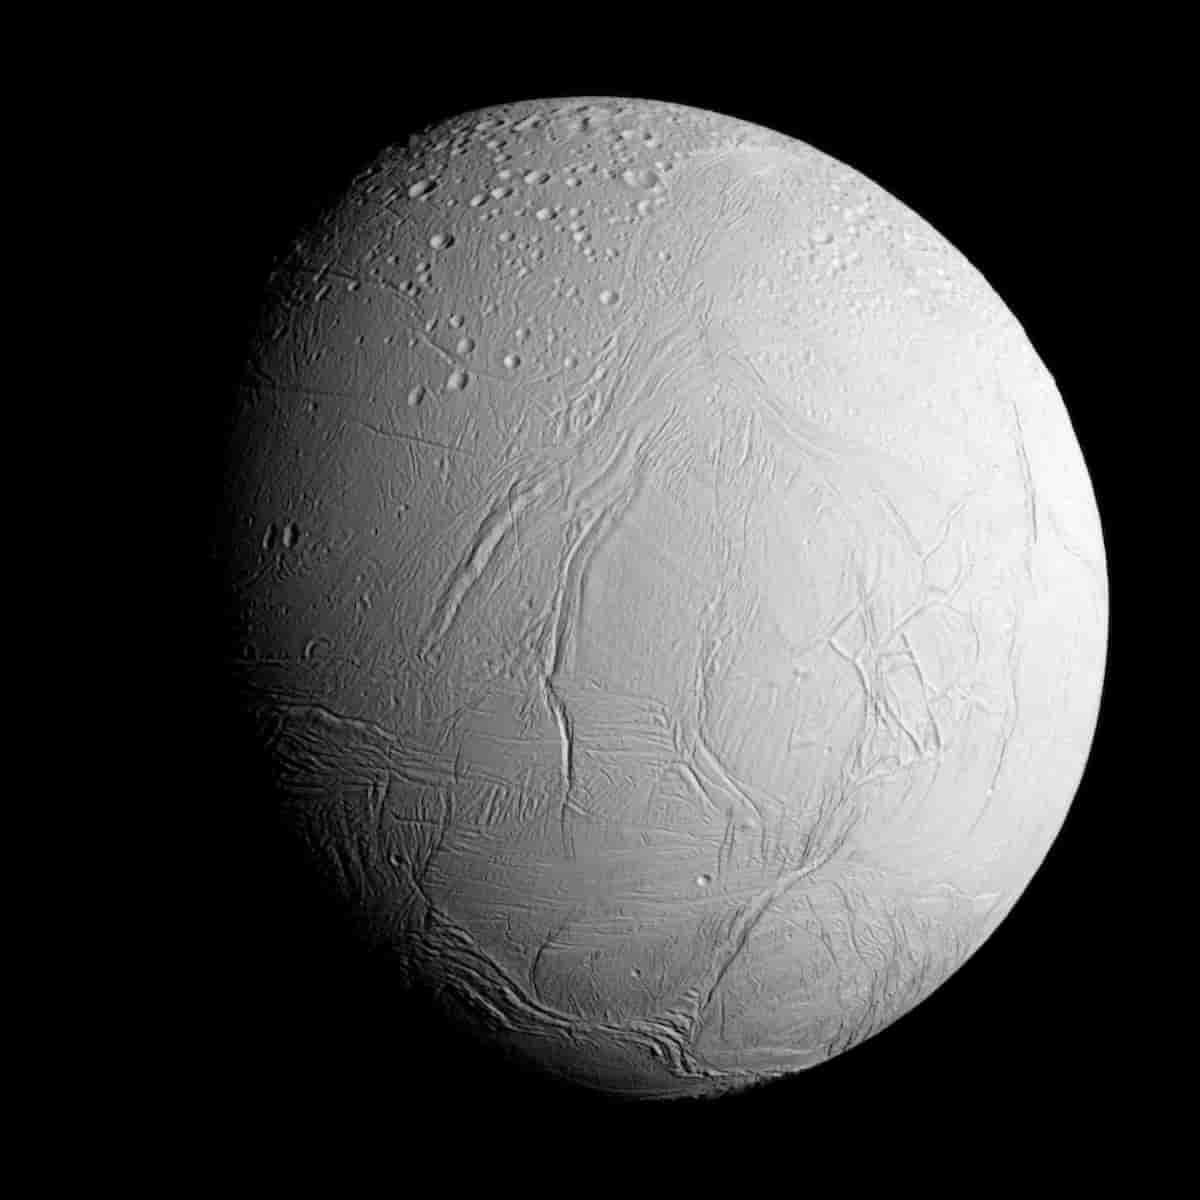 Saturn's Moon Enceladus: A New Front in the Search for Extraterrestrial Life